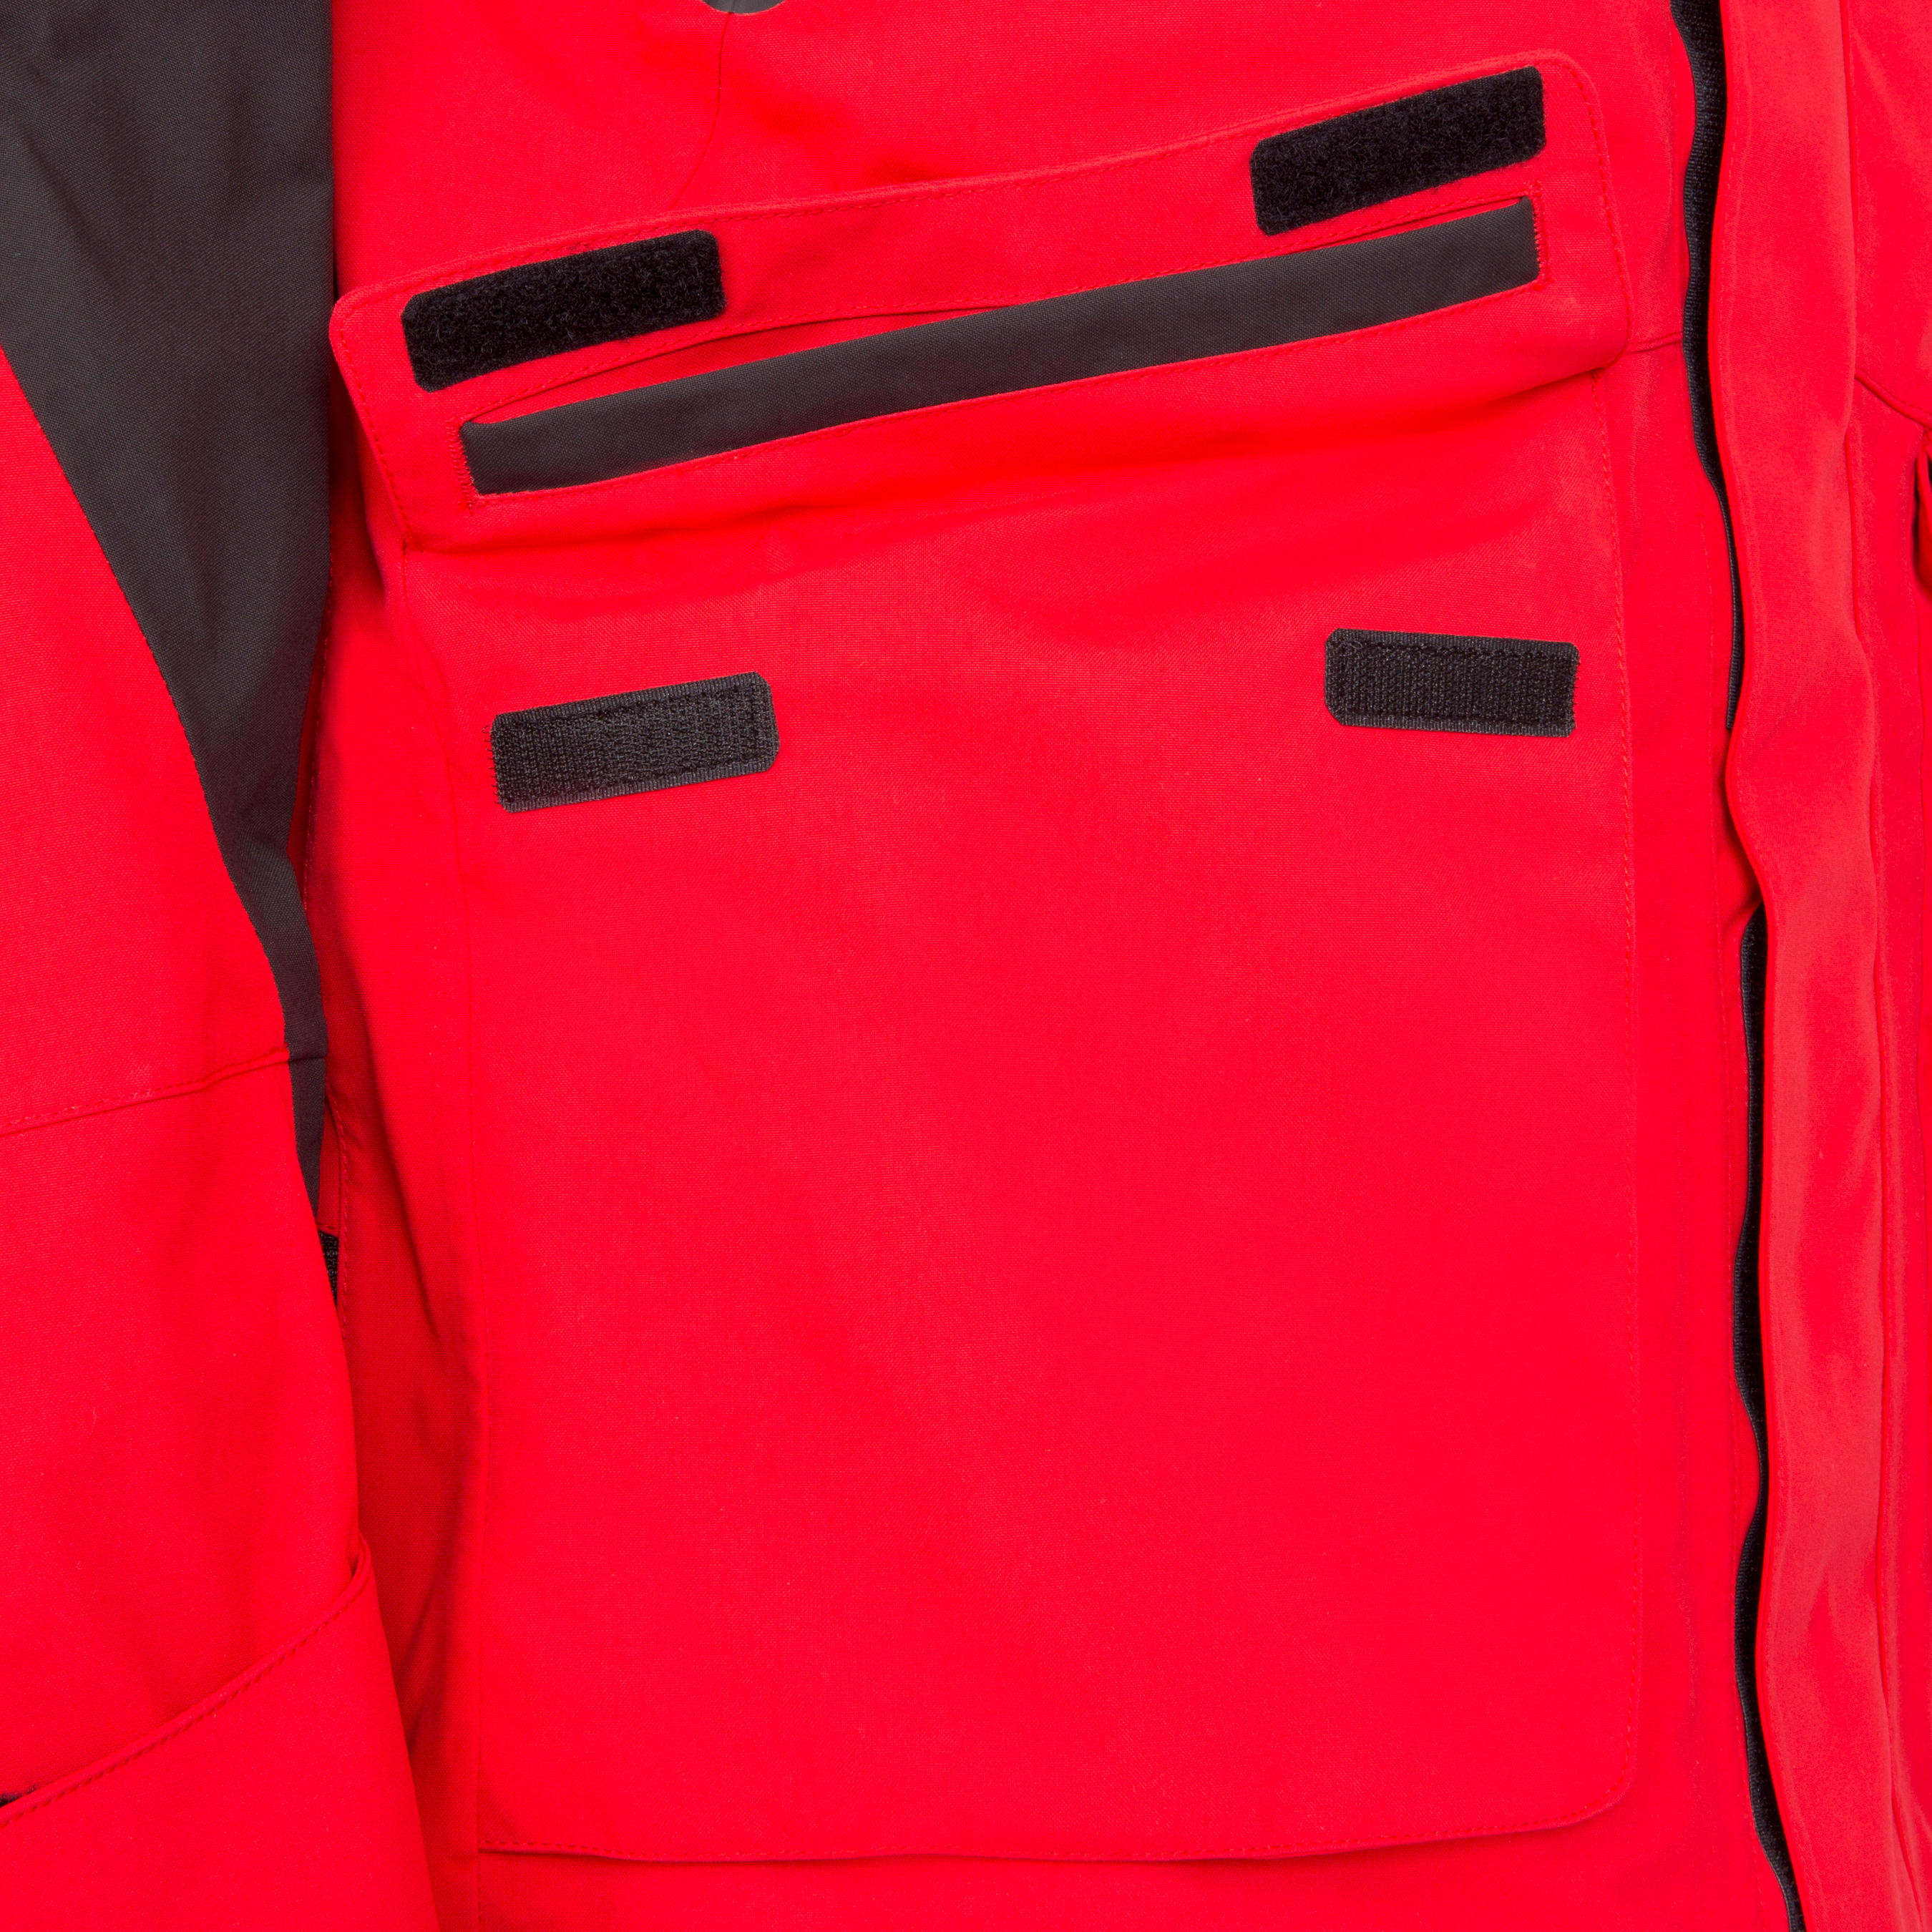 Ozean 900 Men's Waterproof and Breathable Sailing Jacket - Red 36/44